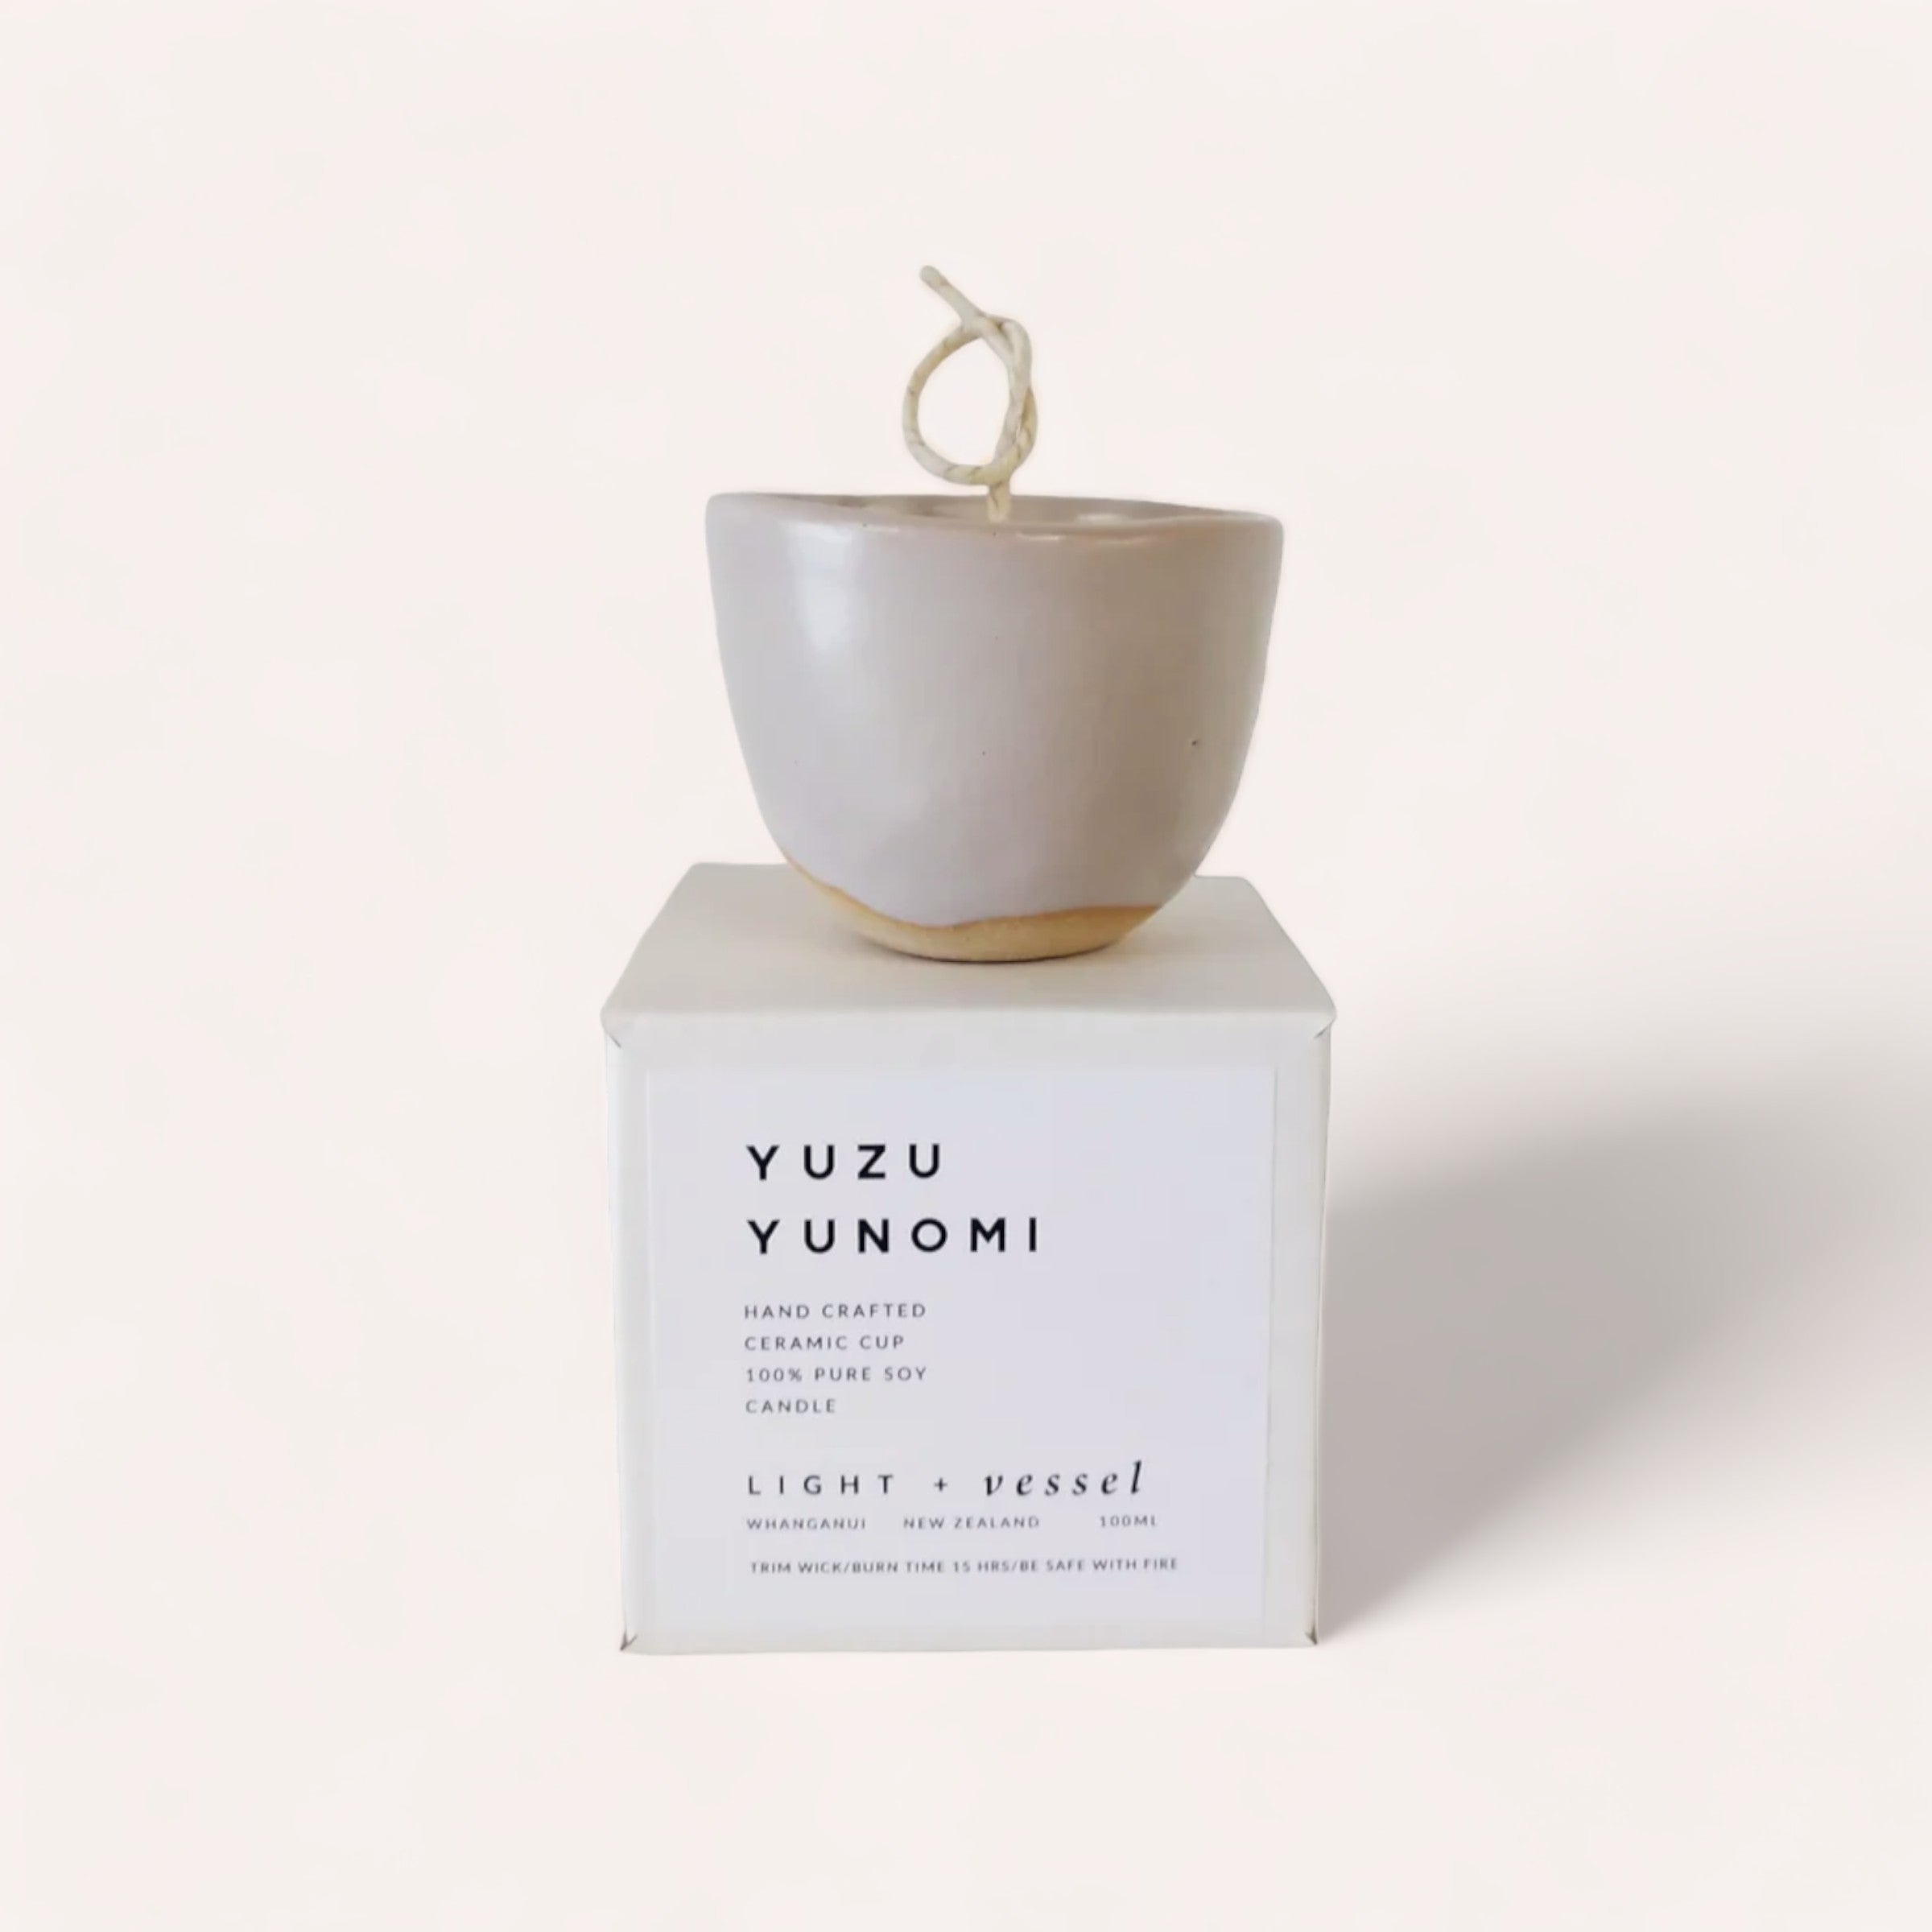 A hand-crafted ceramic Japanese tea cup Yuzu Candle by Light + Vessel soy candle, embodying minimalistic elegance.